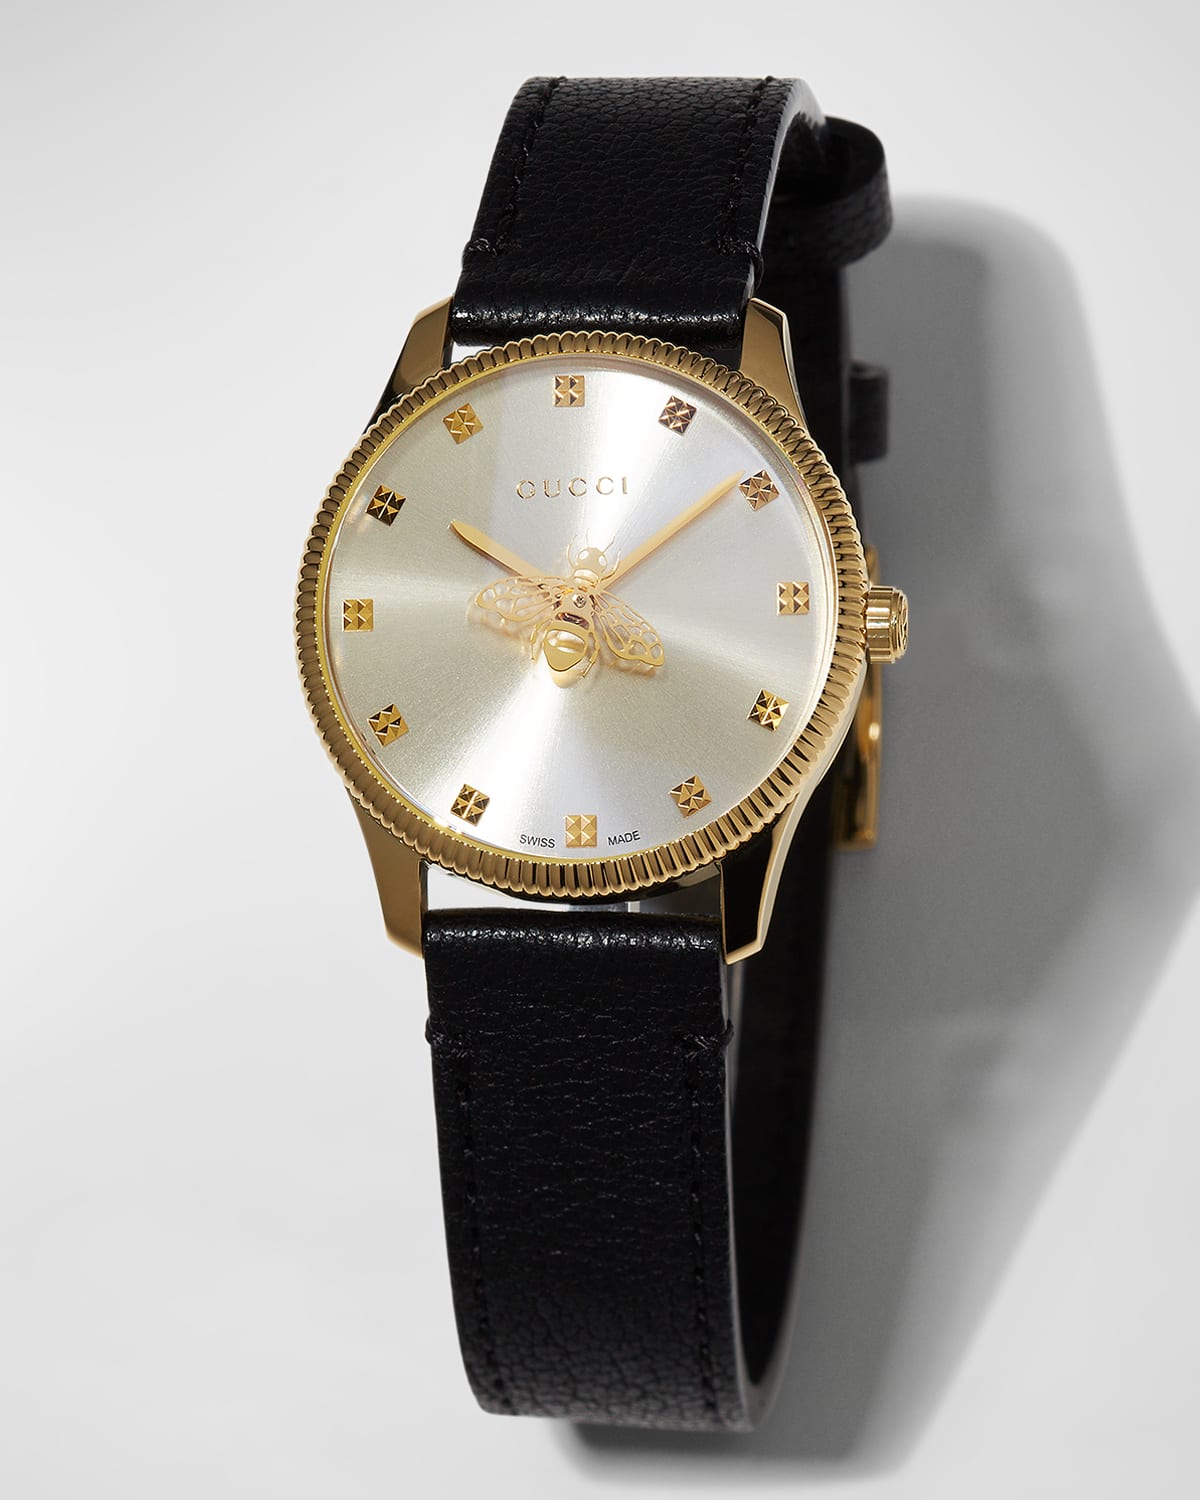 29mm G-Timeless Bee Watch with Leather Strap